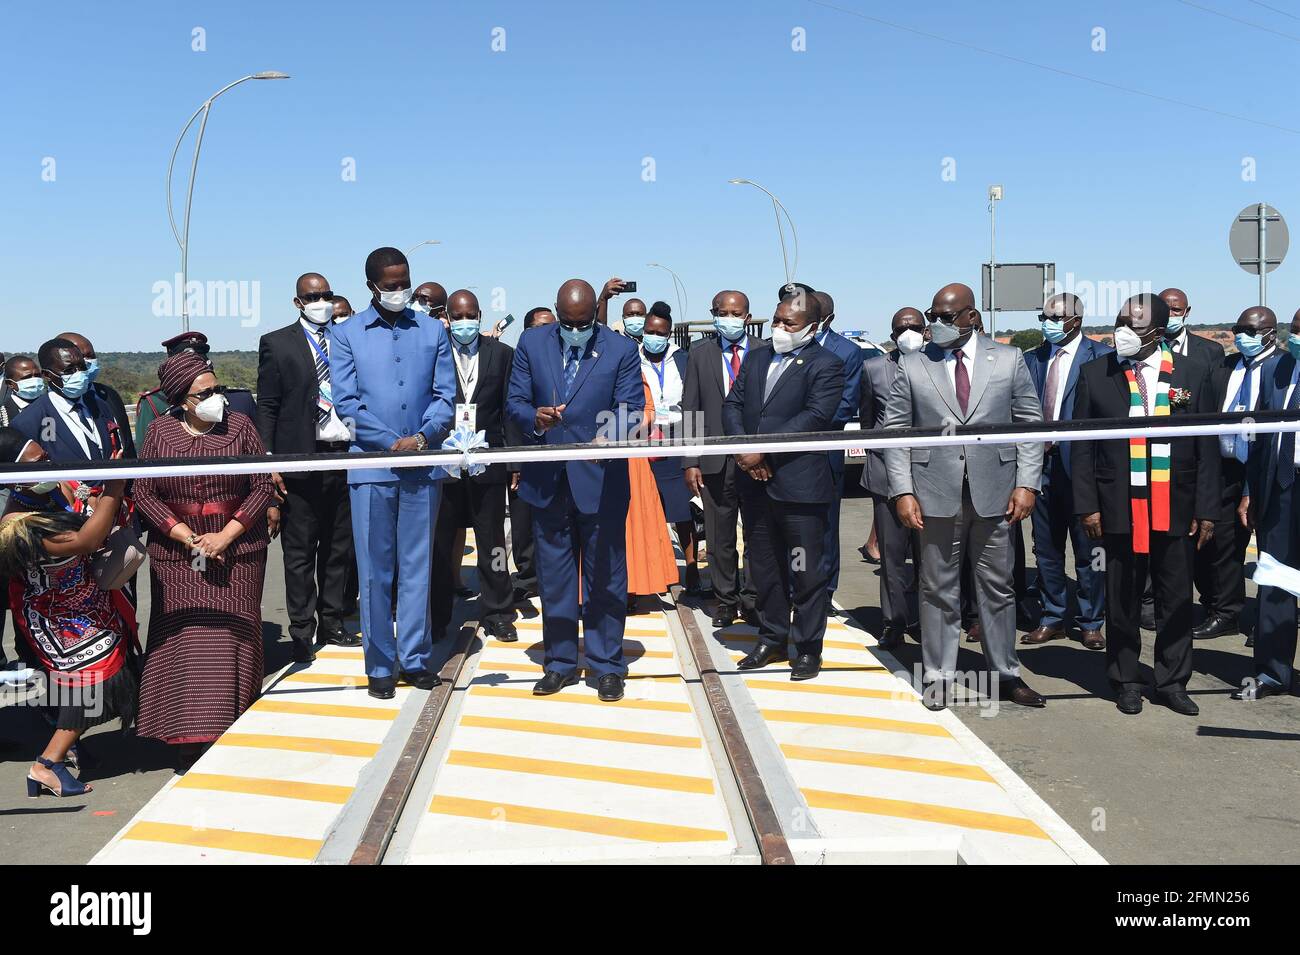 Gaborone. 10th May, 2021. Botswanan President Mokgweetsi Masisi cuts the ribbon to mark the official opening of Kazungula bridge connecting Botswana and Zambia on May 10, 2021. Botswana and Zambia on Monday jointly opened the Kazungula bridge, which is composed of a roadway and a rail track over the Zambezi river that connects the two countries, as well as a one-stop border post. Credit: Tshekiso Tebalo/Xinhua/Alamy Live News Stock Photo